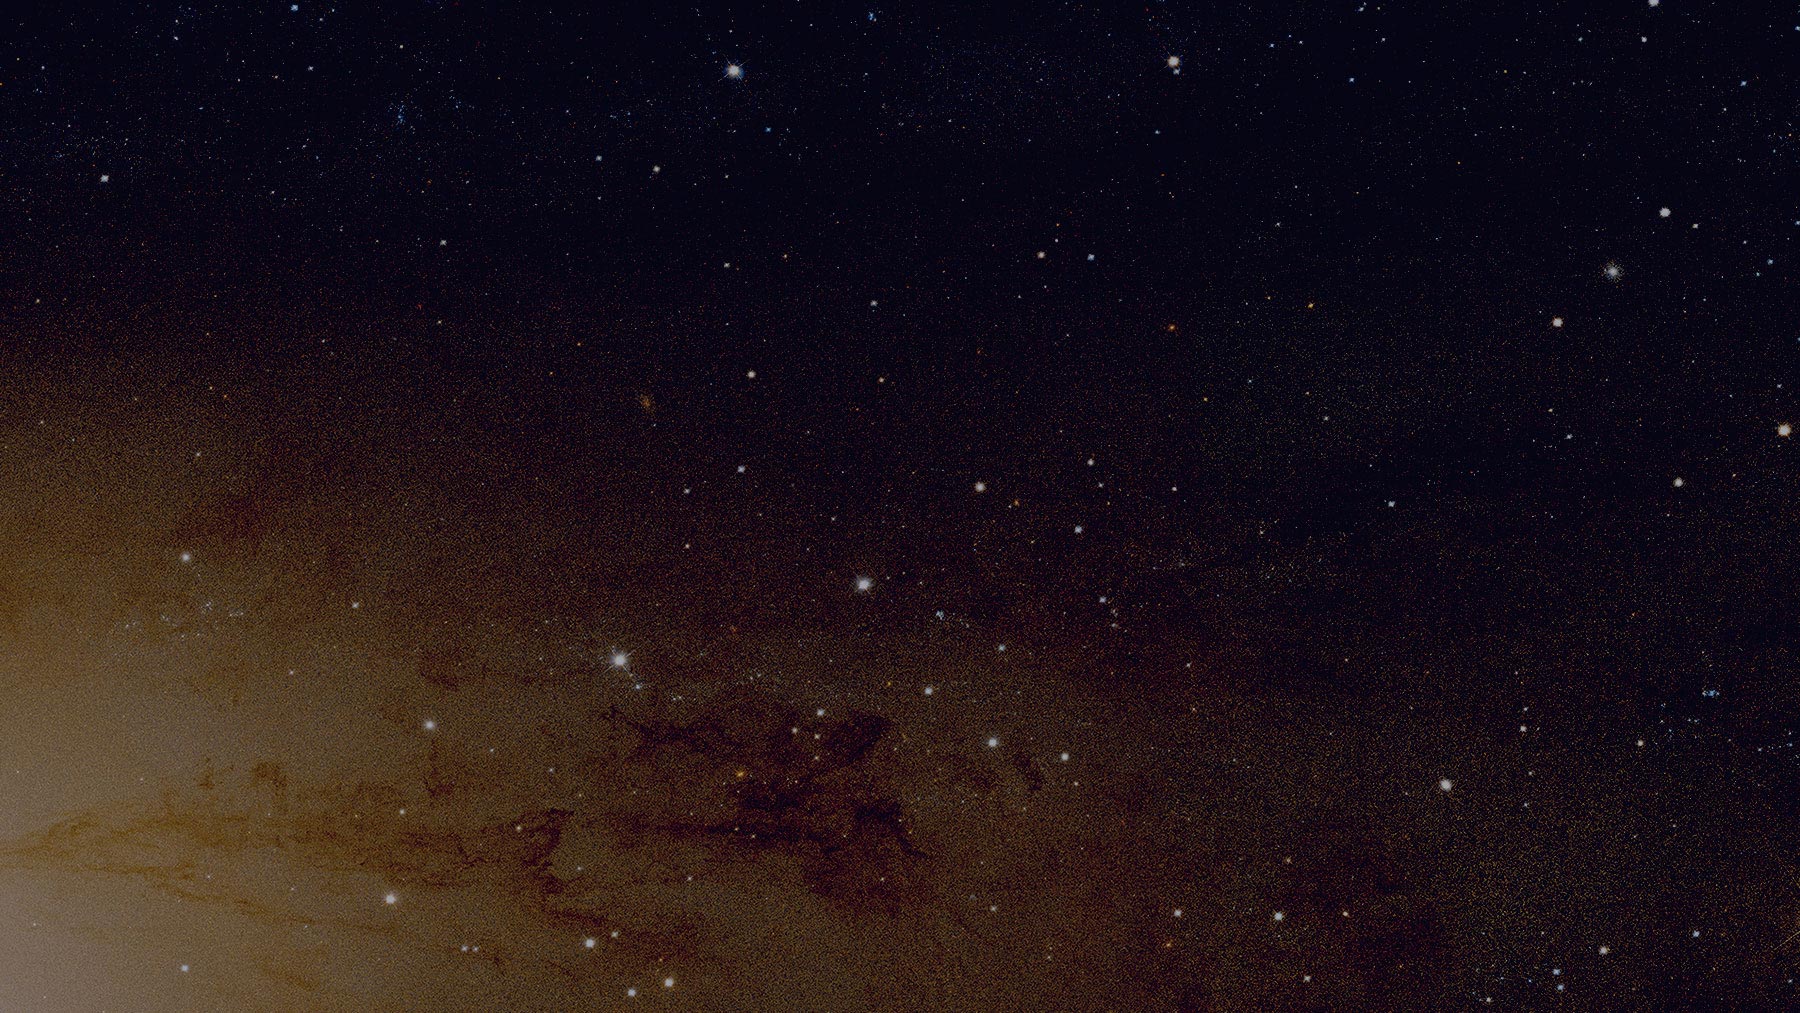 Background image of the night sky with glowing stars.